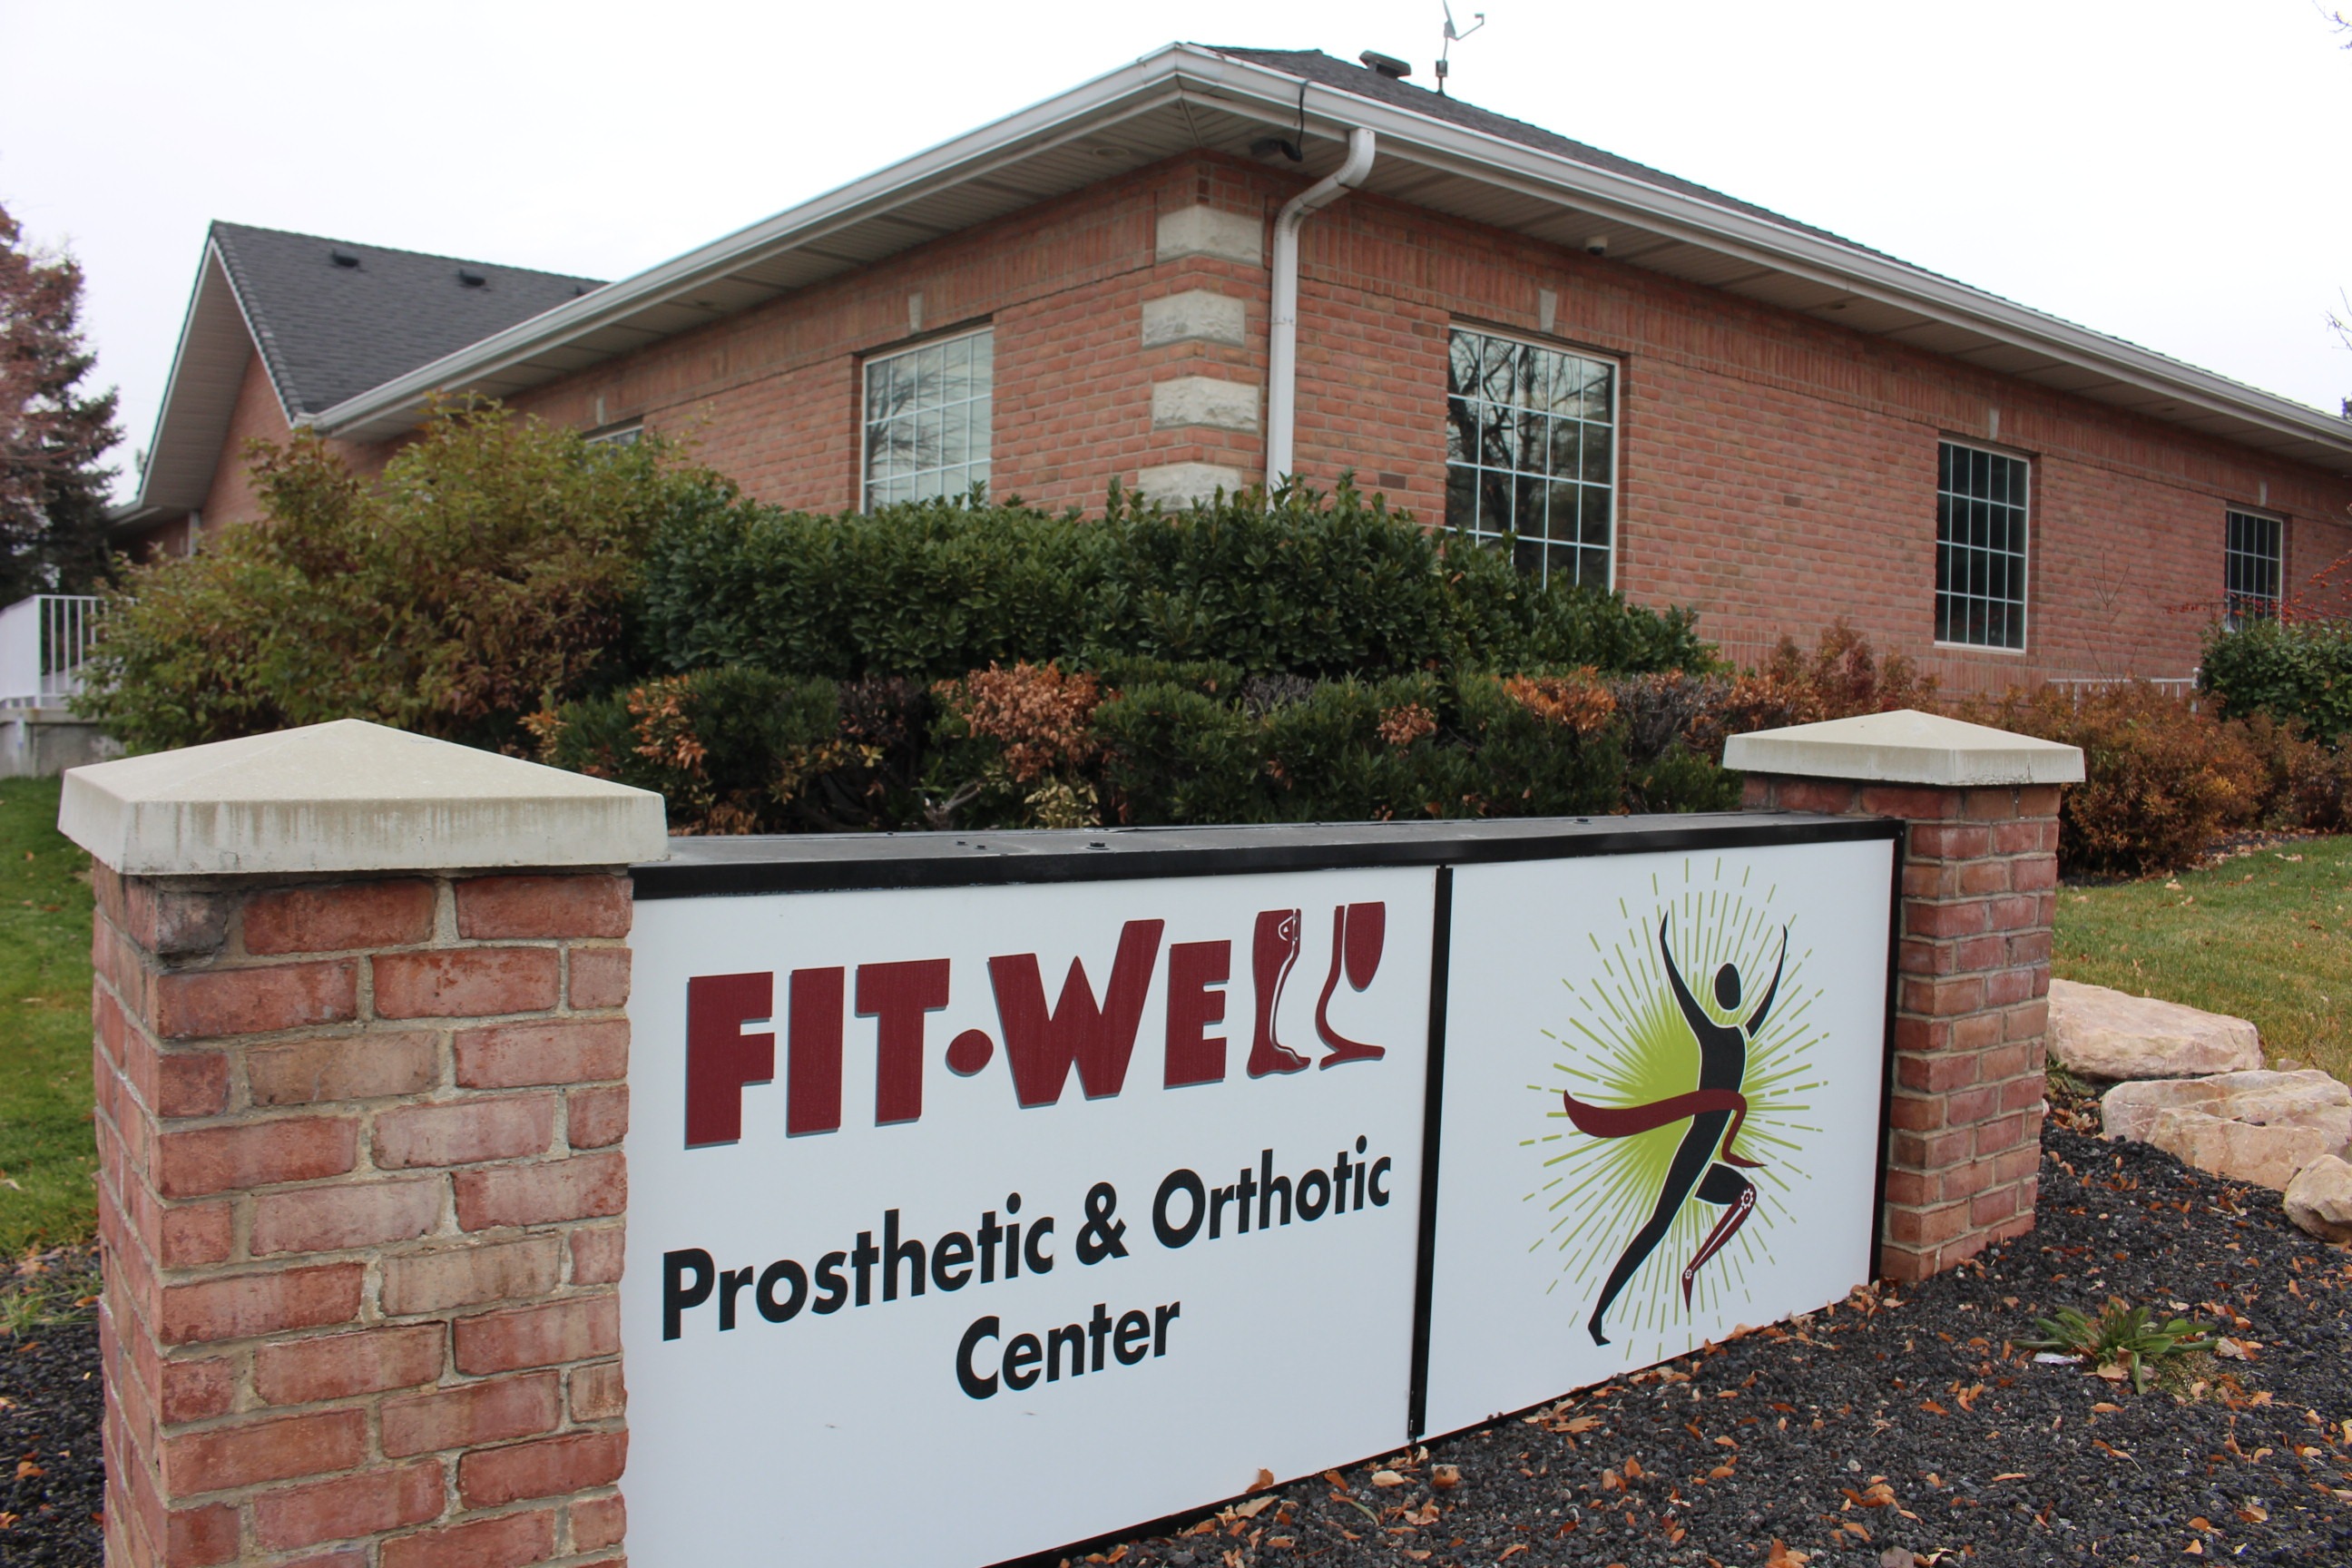 Fitwell Prosthetic & Orthotic Center